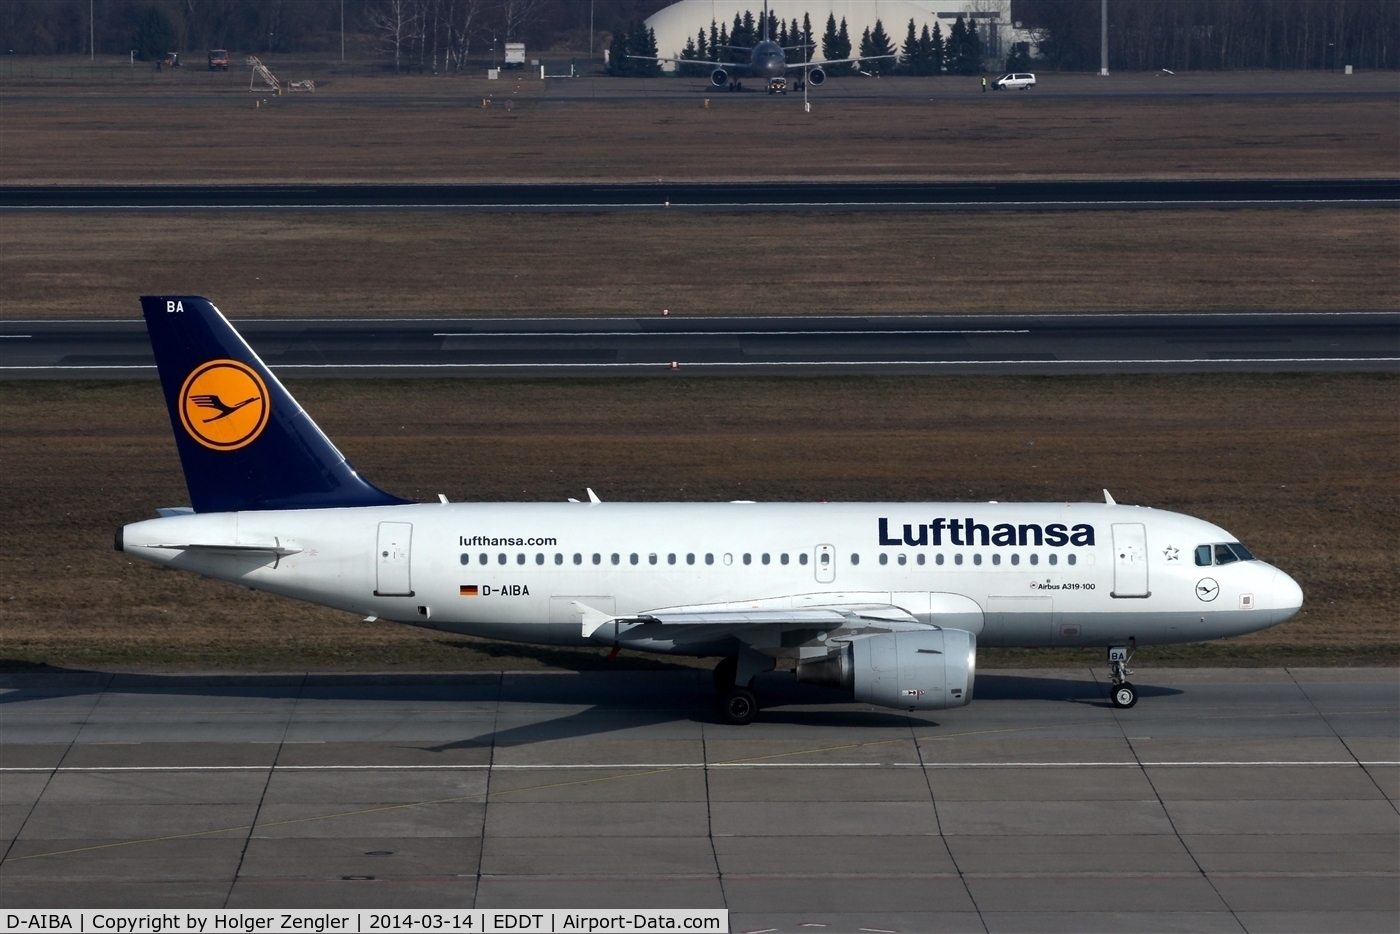 D-AIBA, 2009 Airbus A319-114 C/N 4141, Expecting departure rwy 26L...